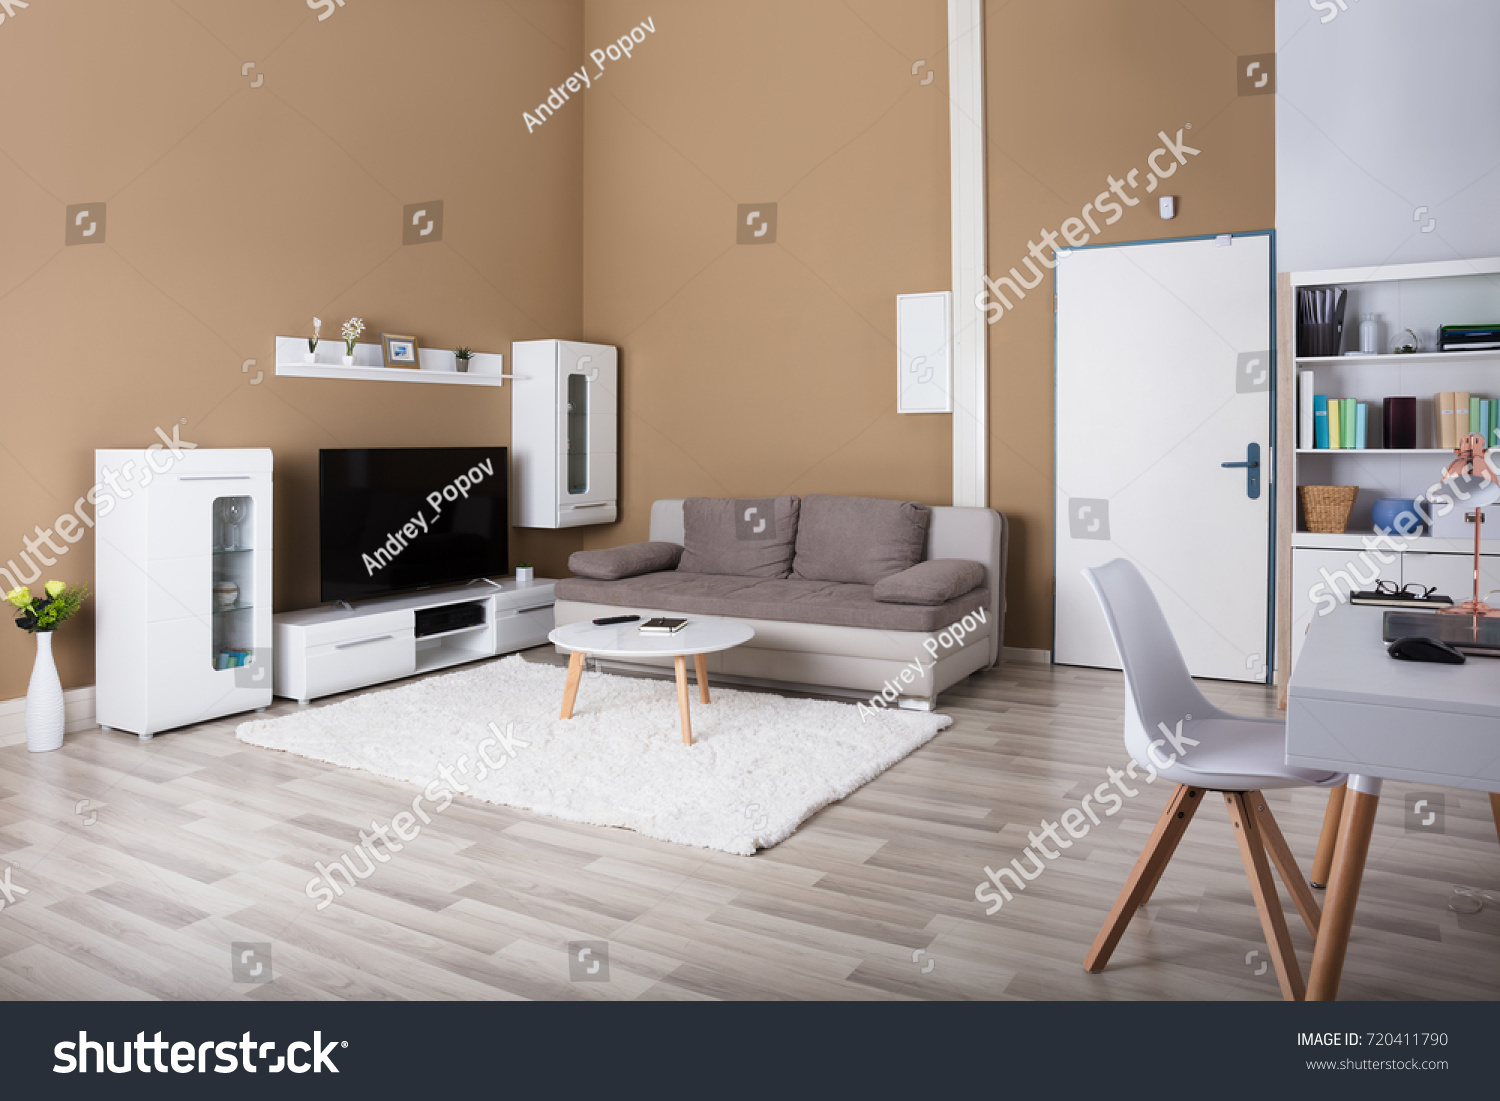 Stock Photo Interior Of Contemporary Living Room With Tv And Sofa 720411790 